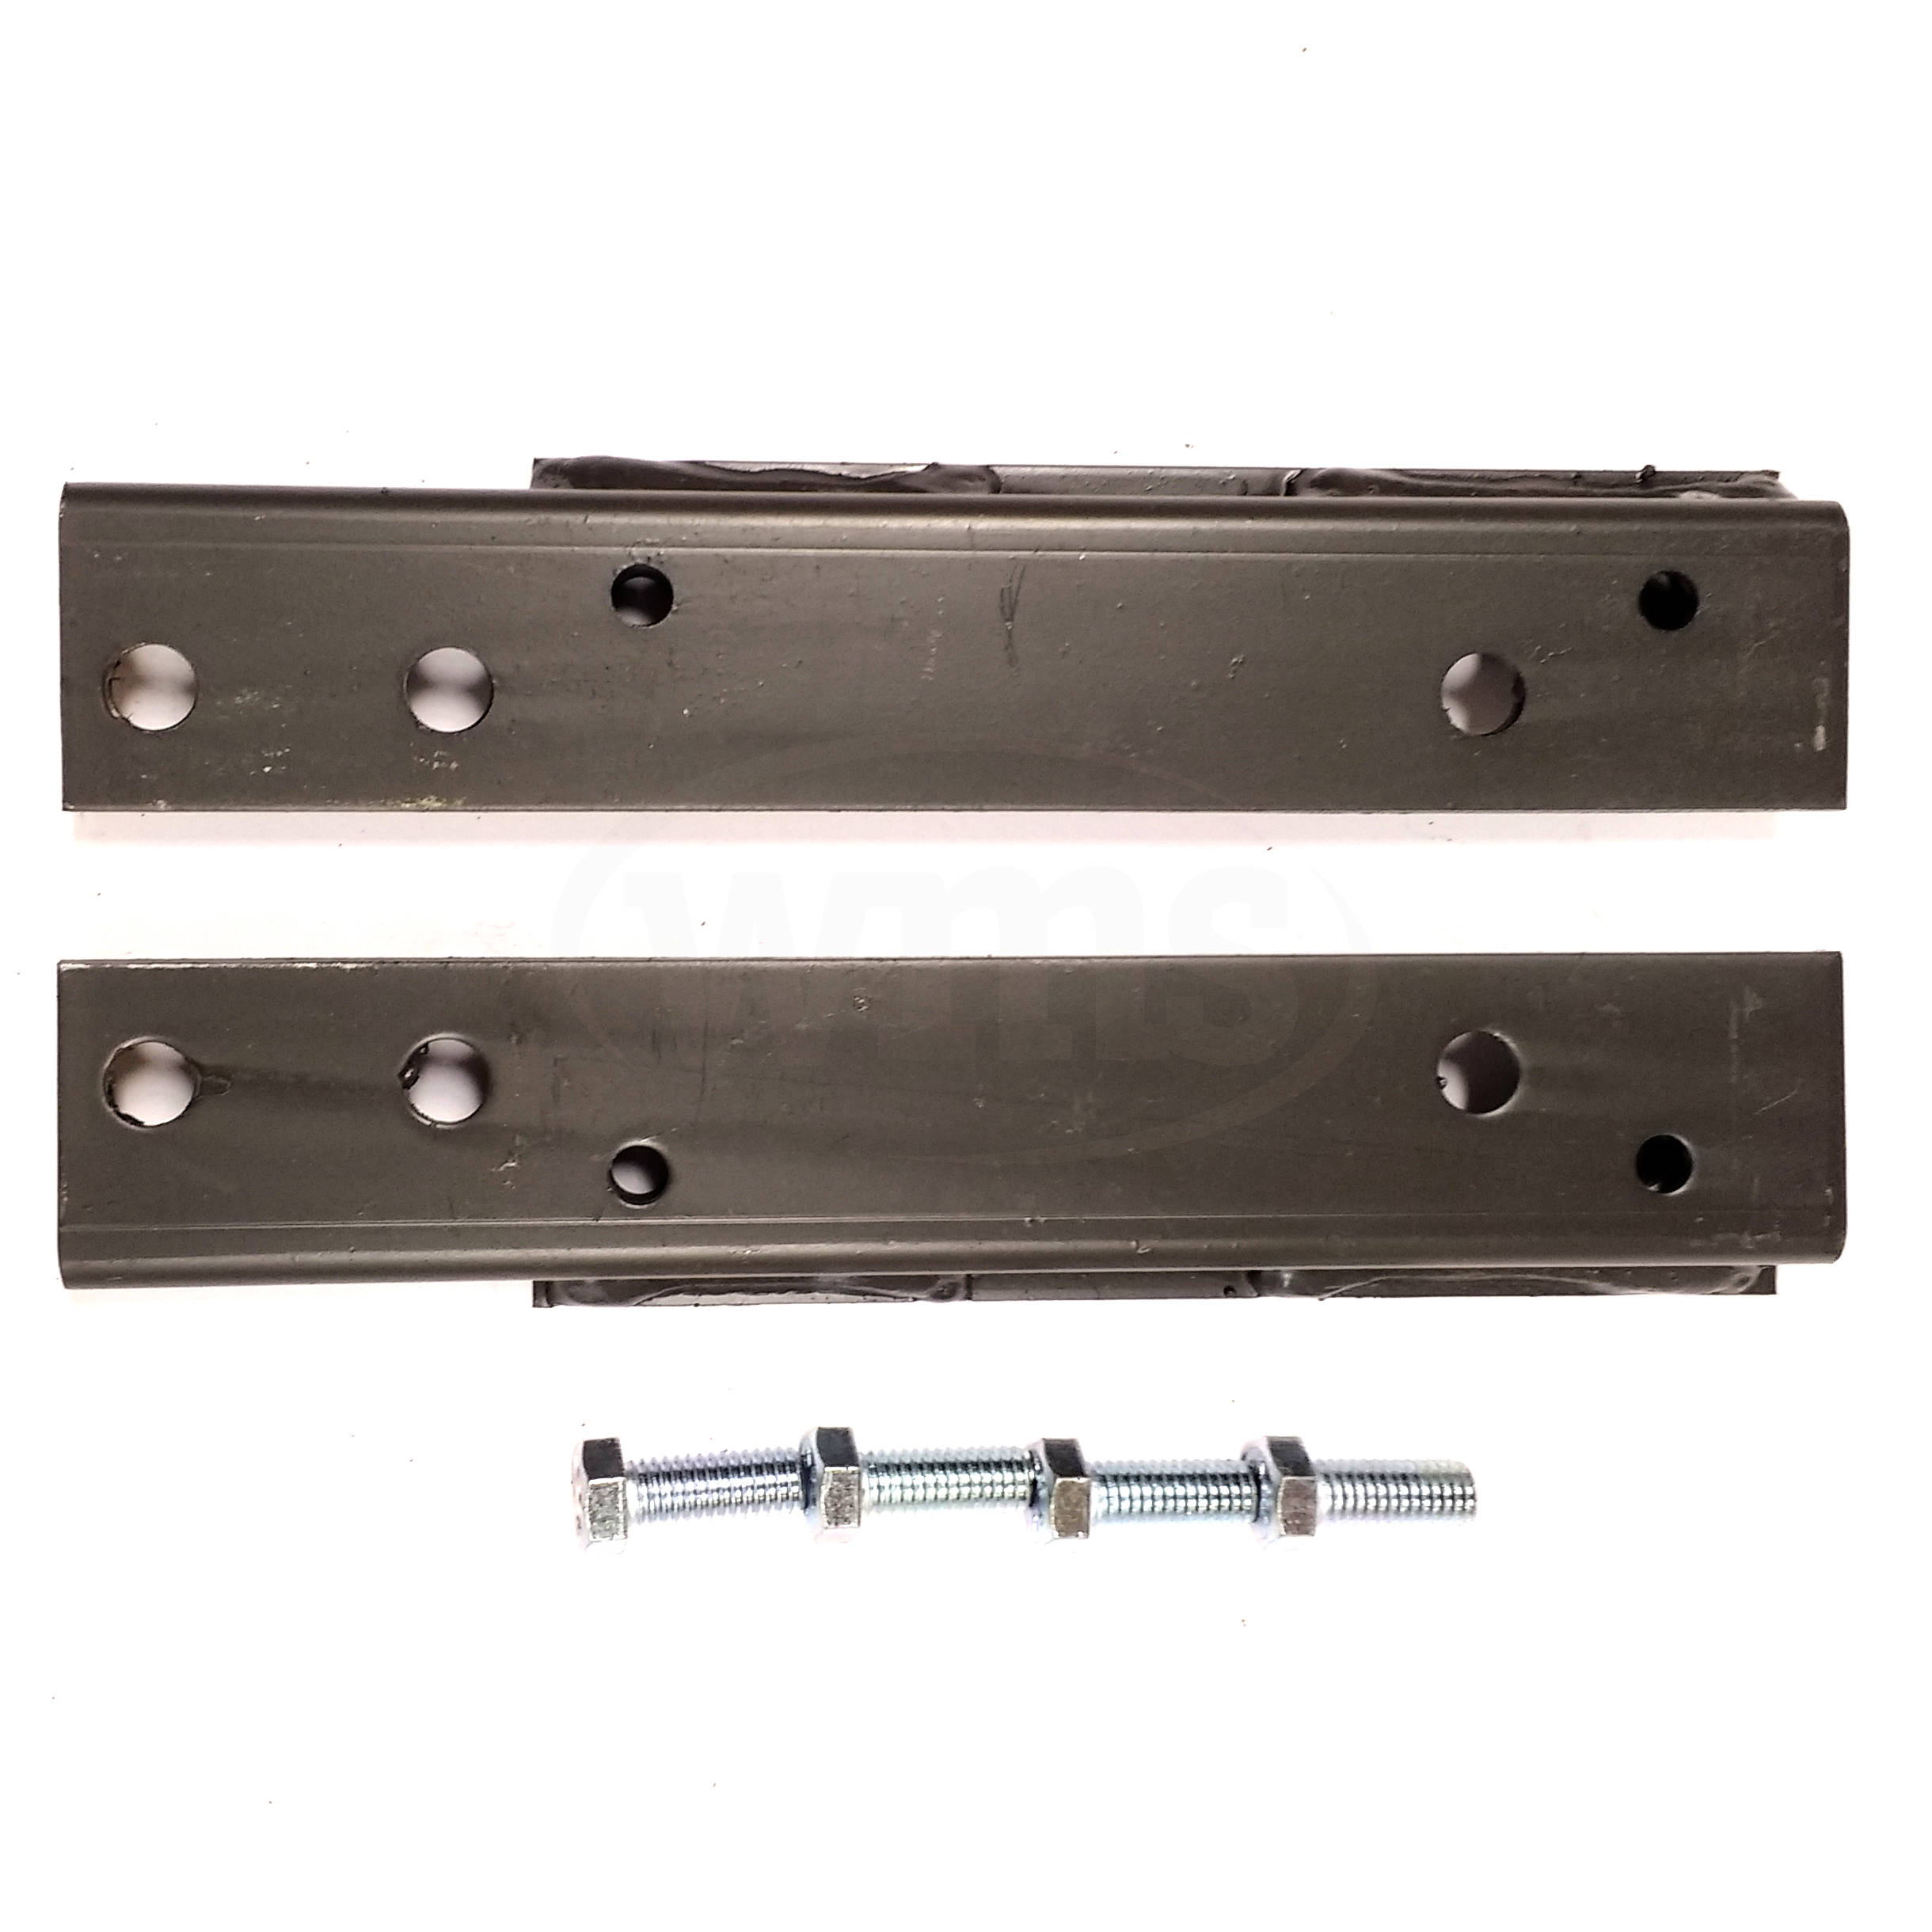 213/215 to 182T/184T Adapt-Mount Conversion Rail 3